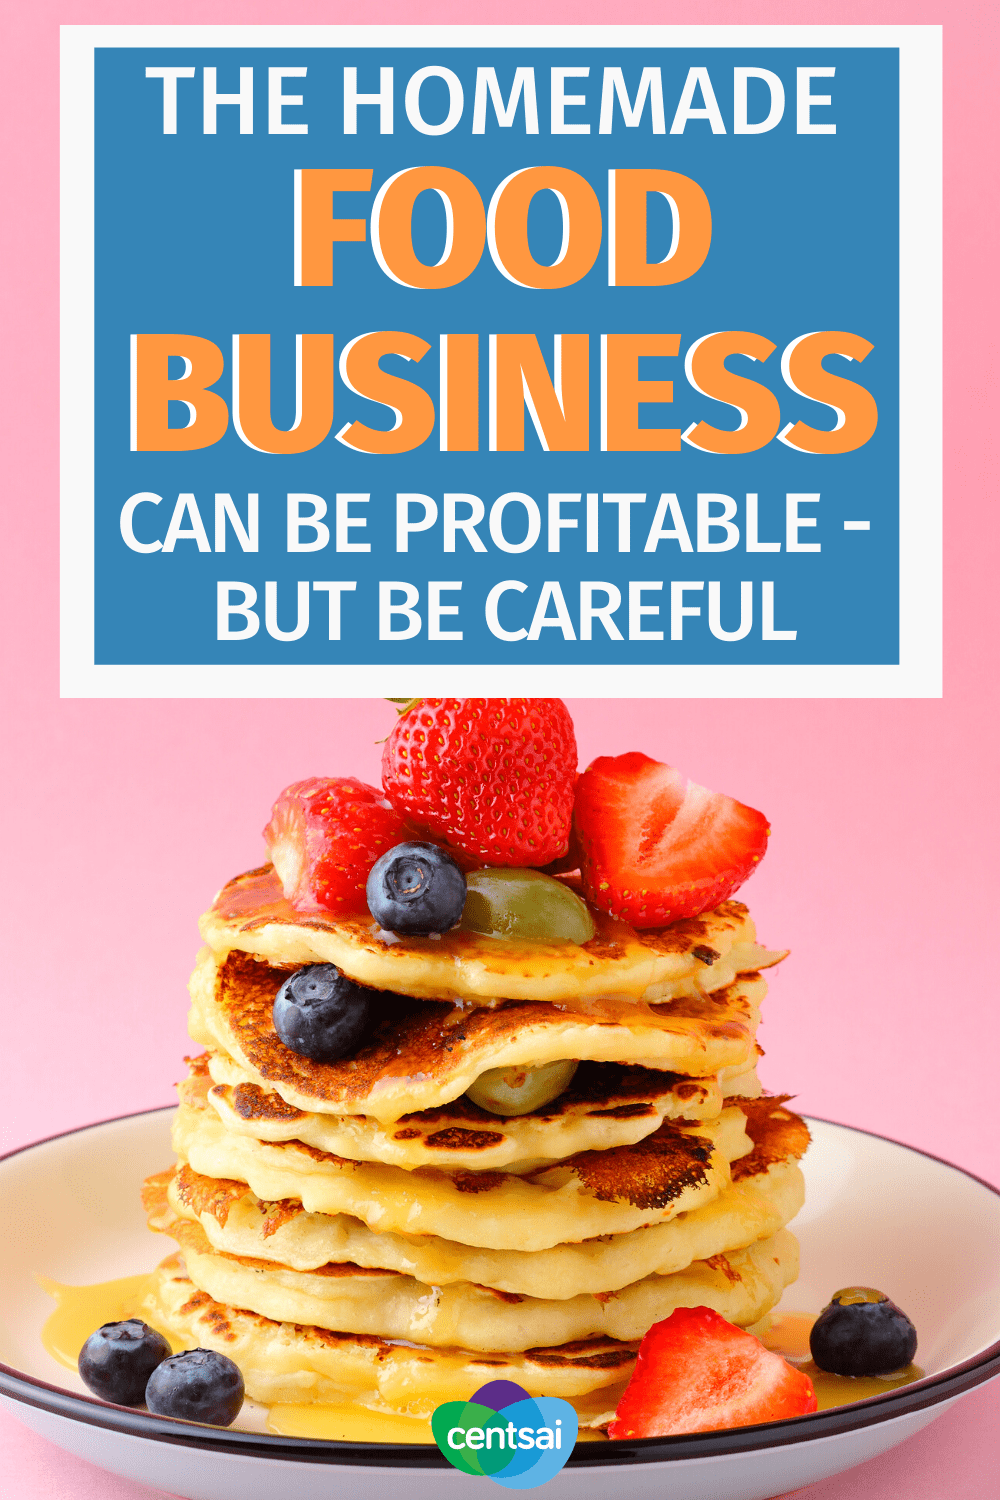 The Homemade Food Business Can Be Profitable - But Be Careful